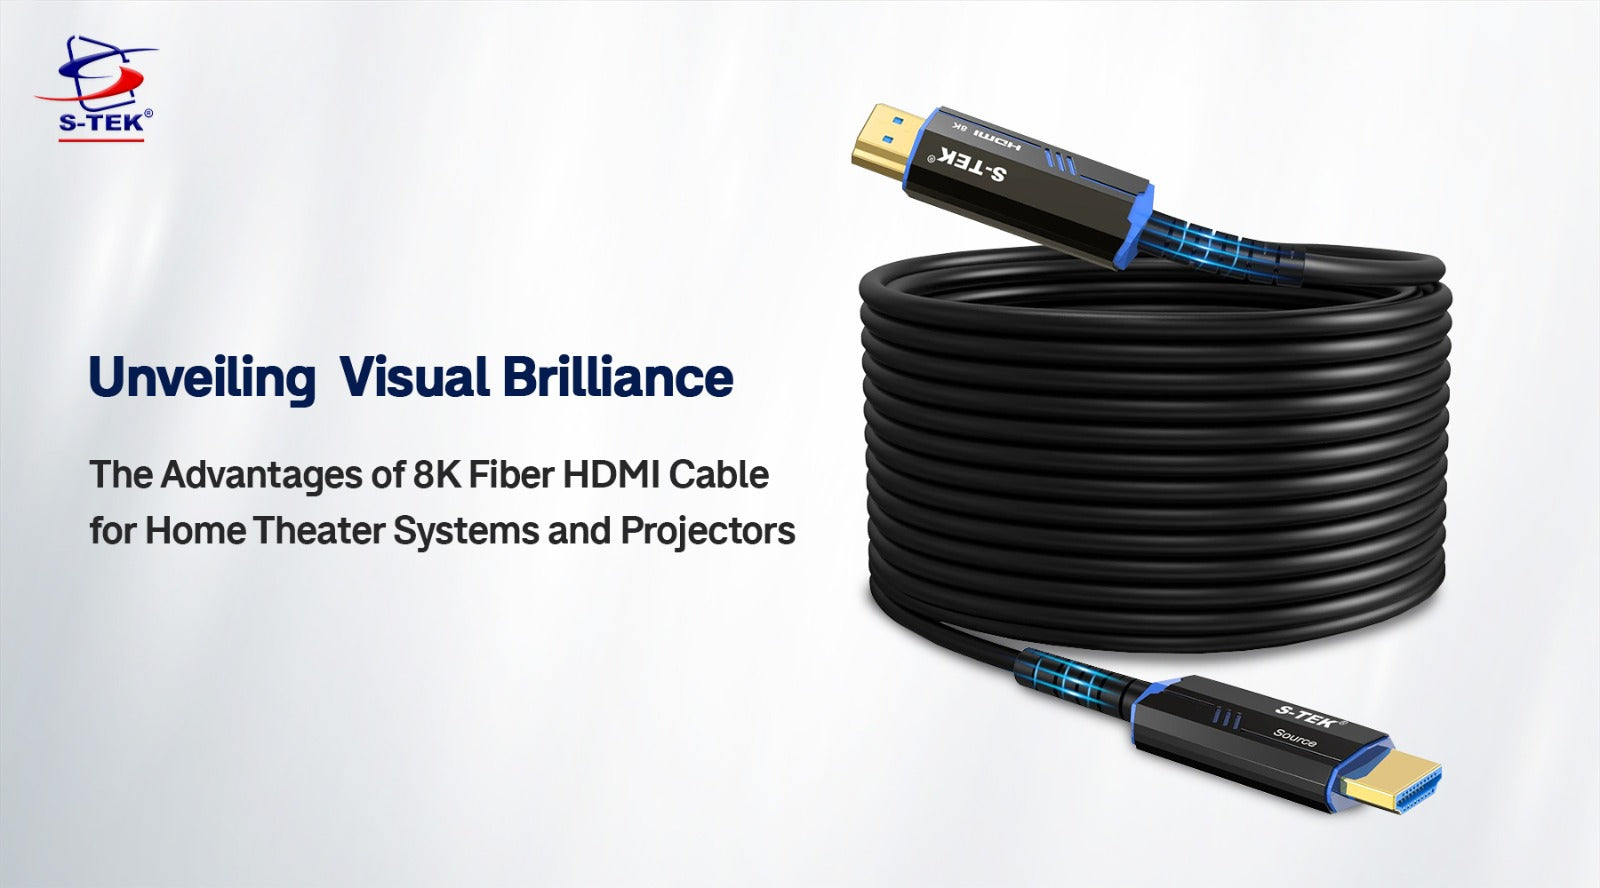 Unveiling Visual Brilliance: The Advantages of 8K Fiber HDMI Cable for Home Theater Systems and Projectors